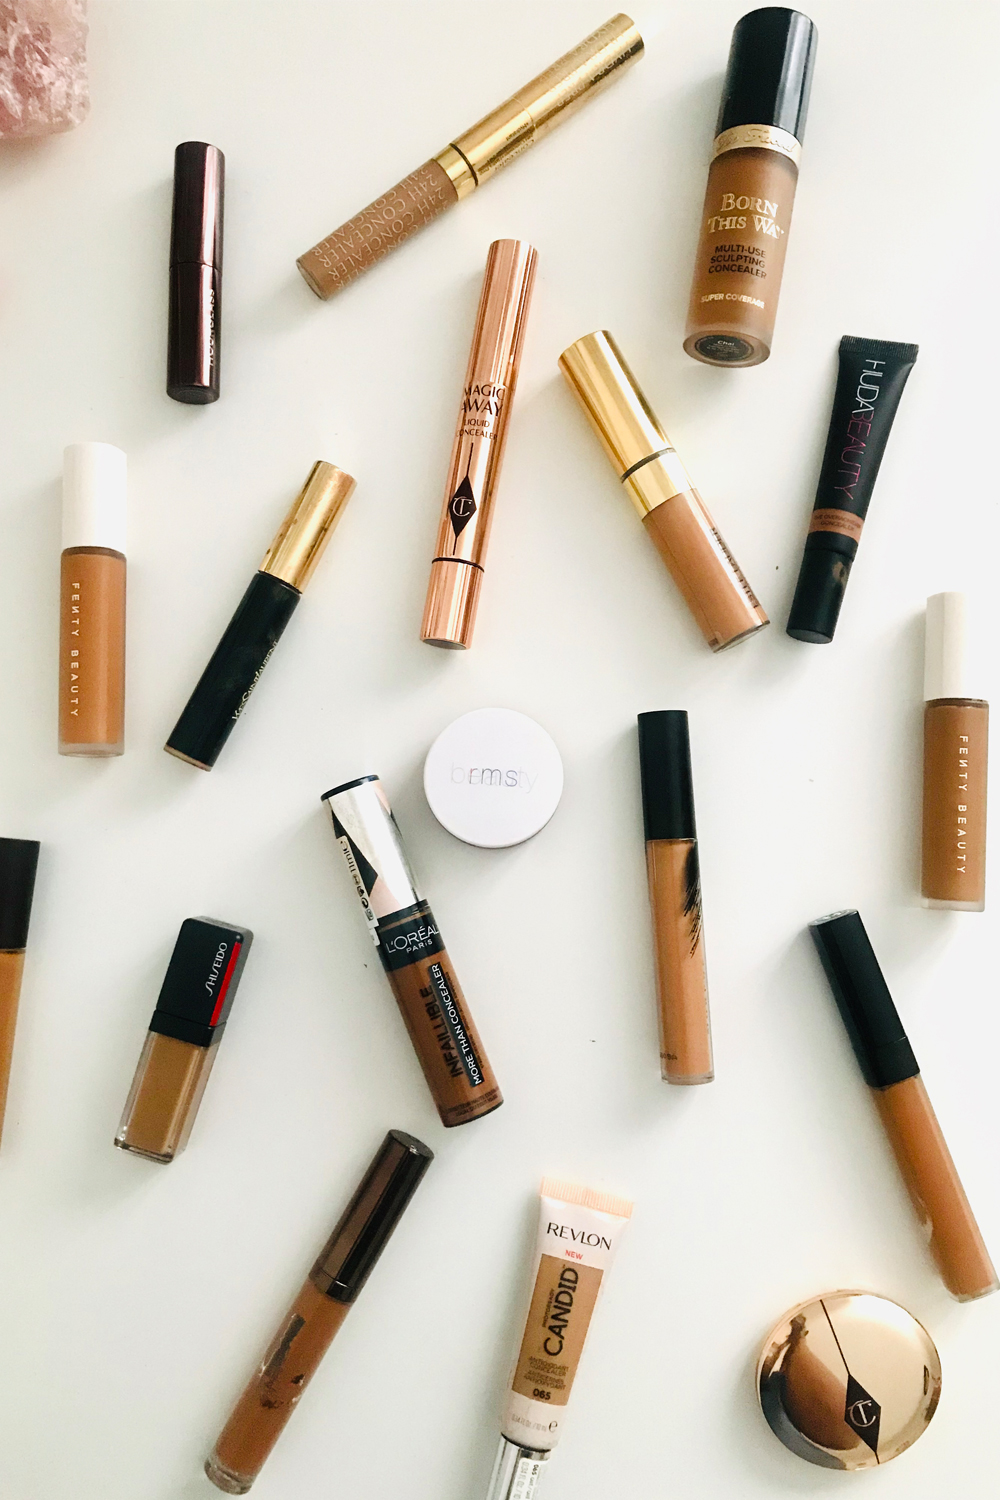 I Tried Over 50 Concealers—These Are the Ones I’d Recommend